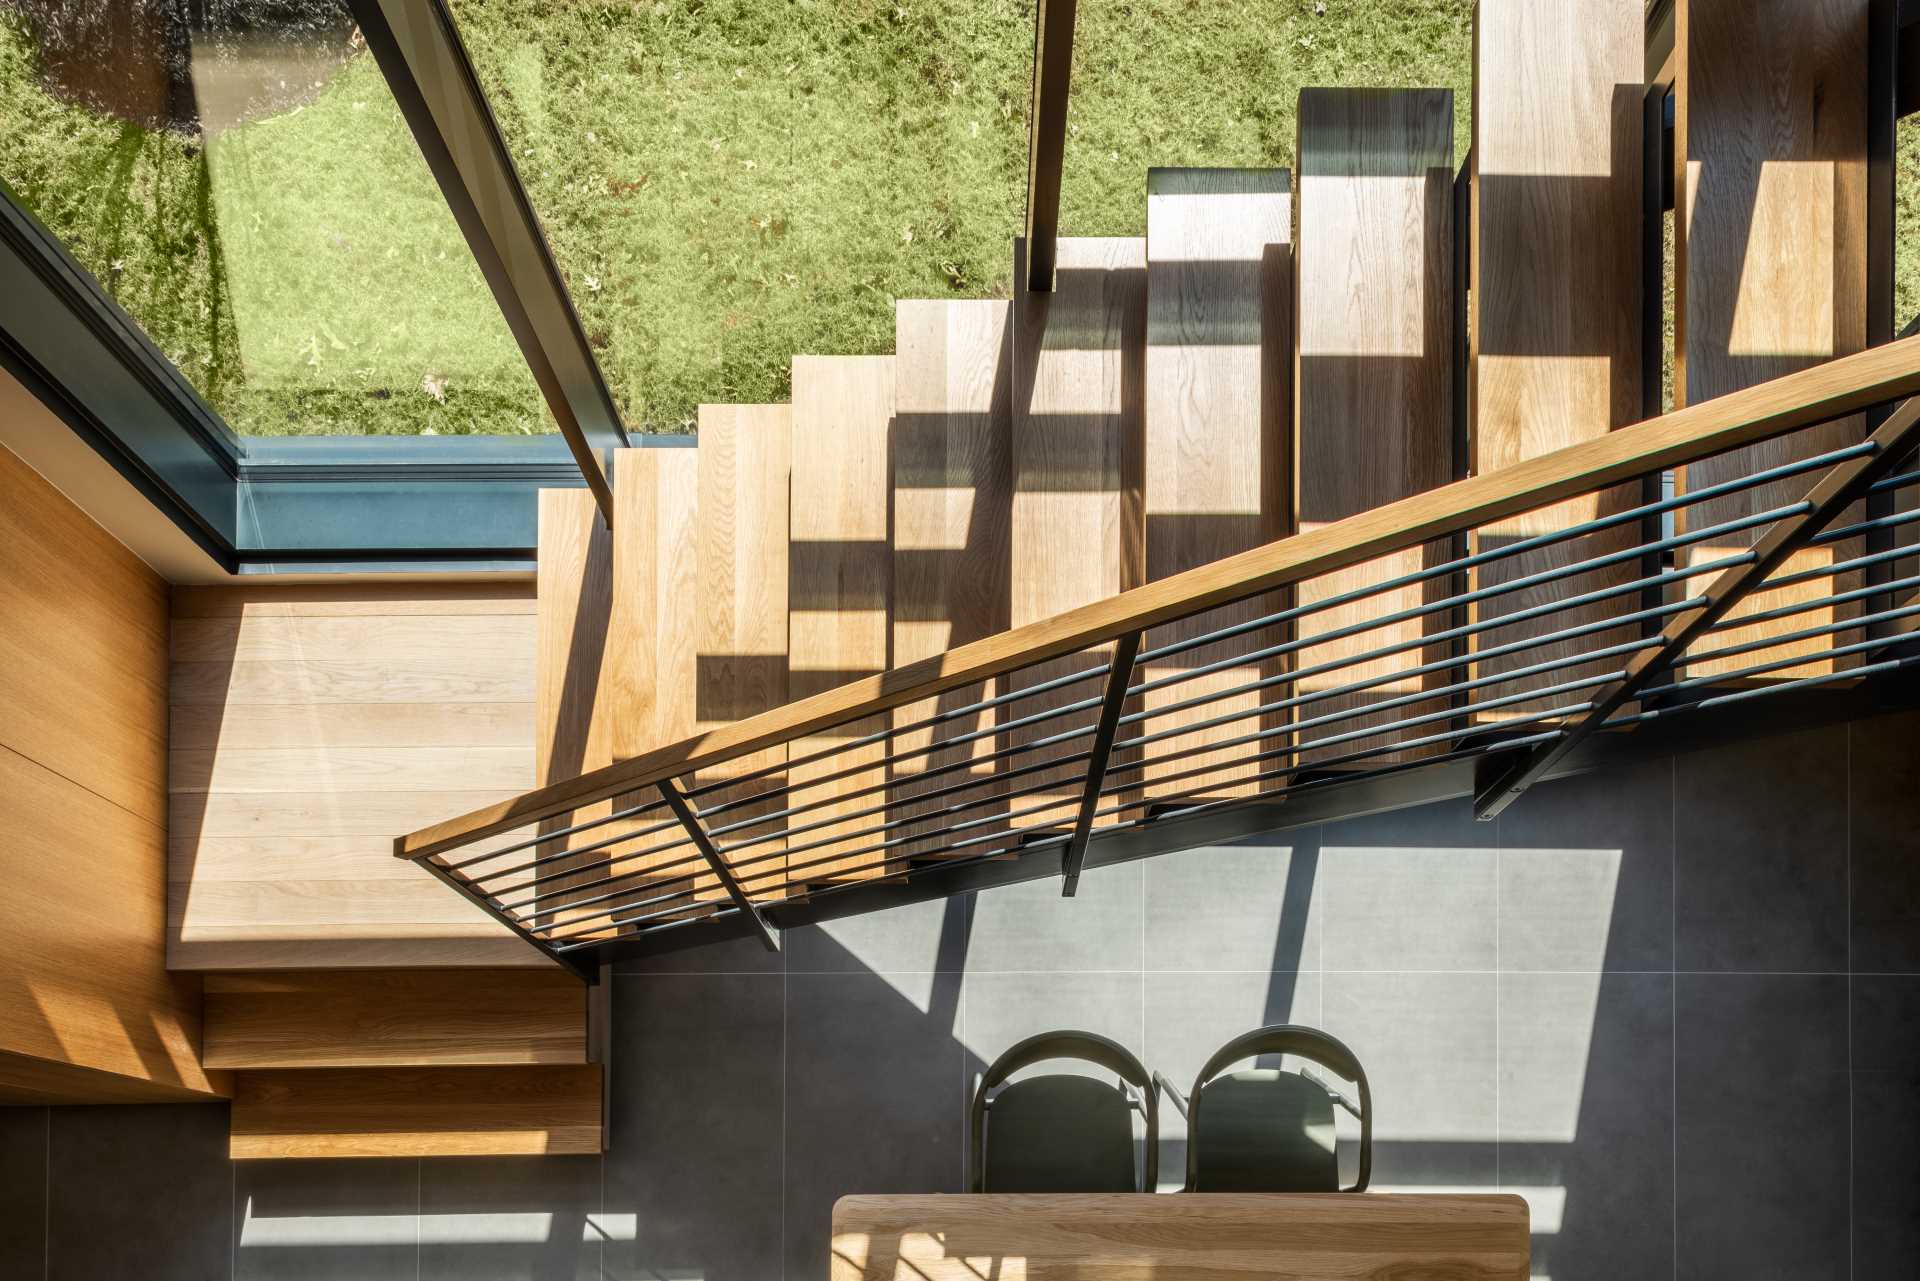 Wood and steel stairs connect the social areas with the private rooms located above.